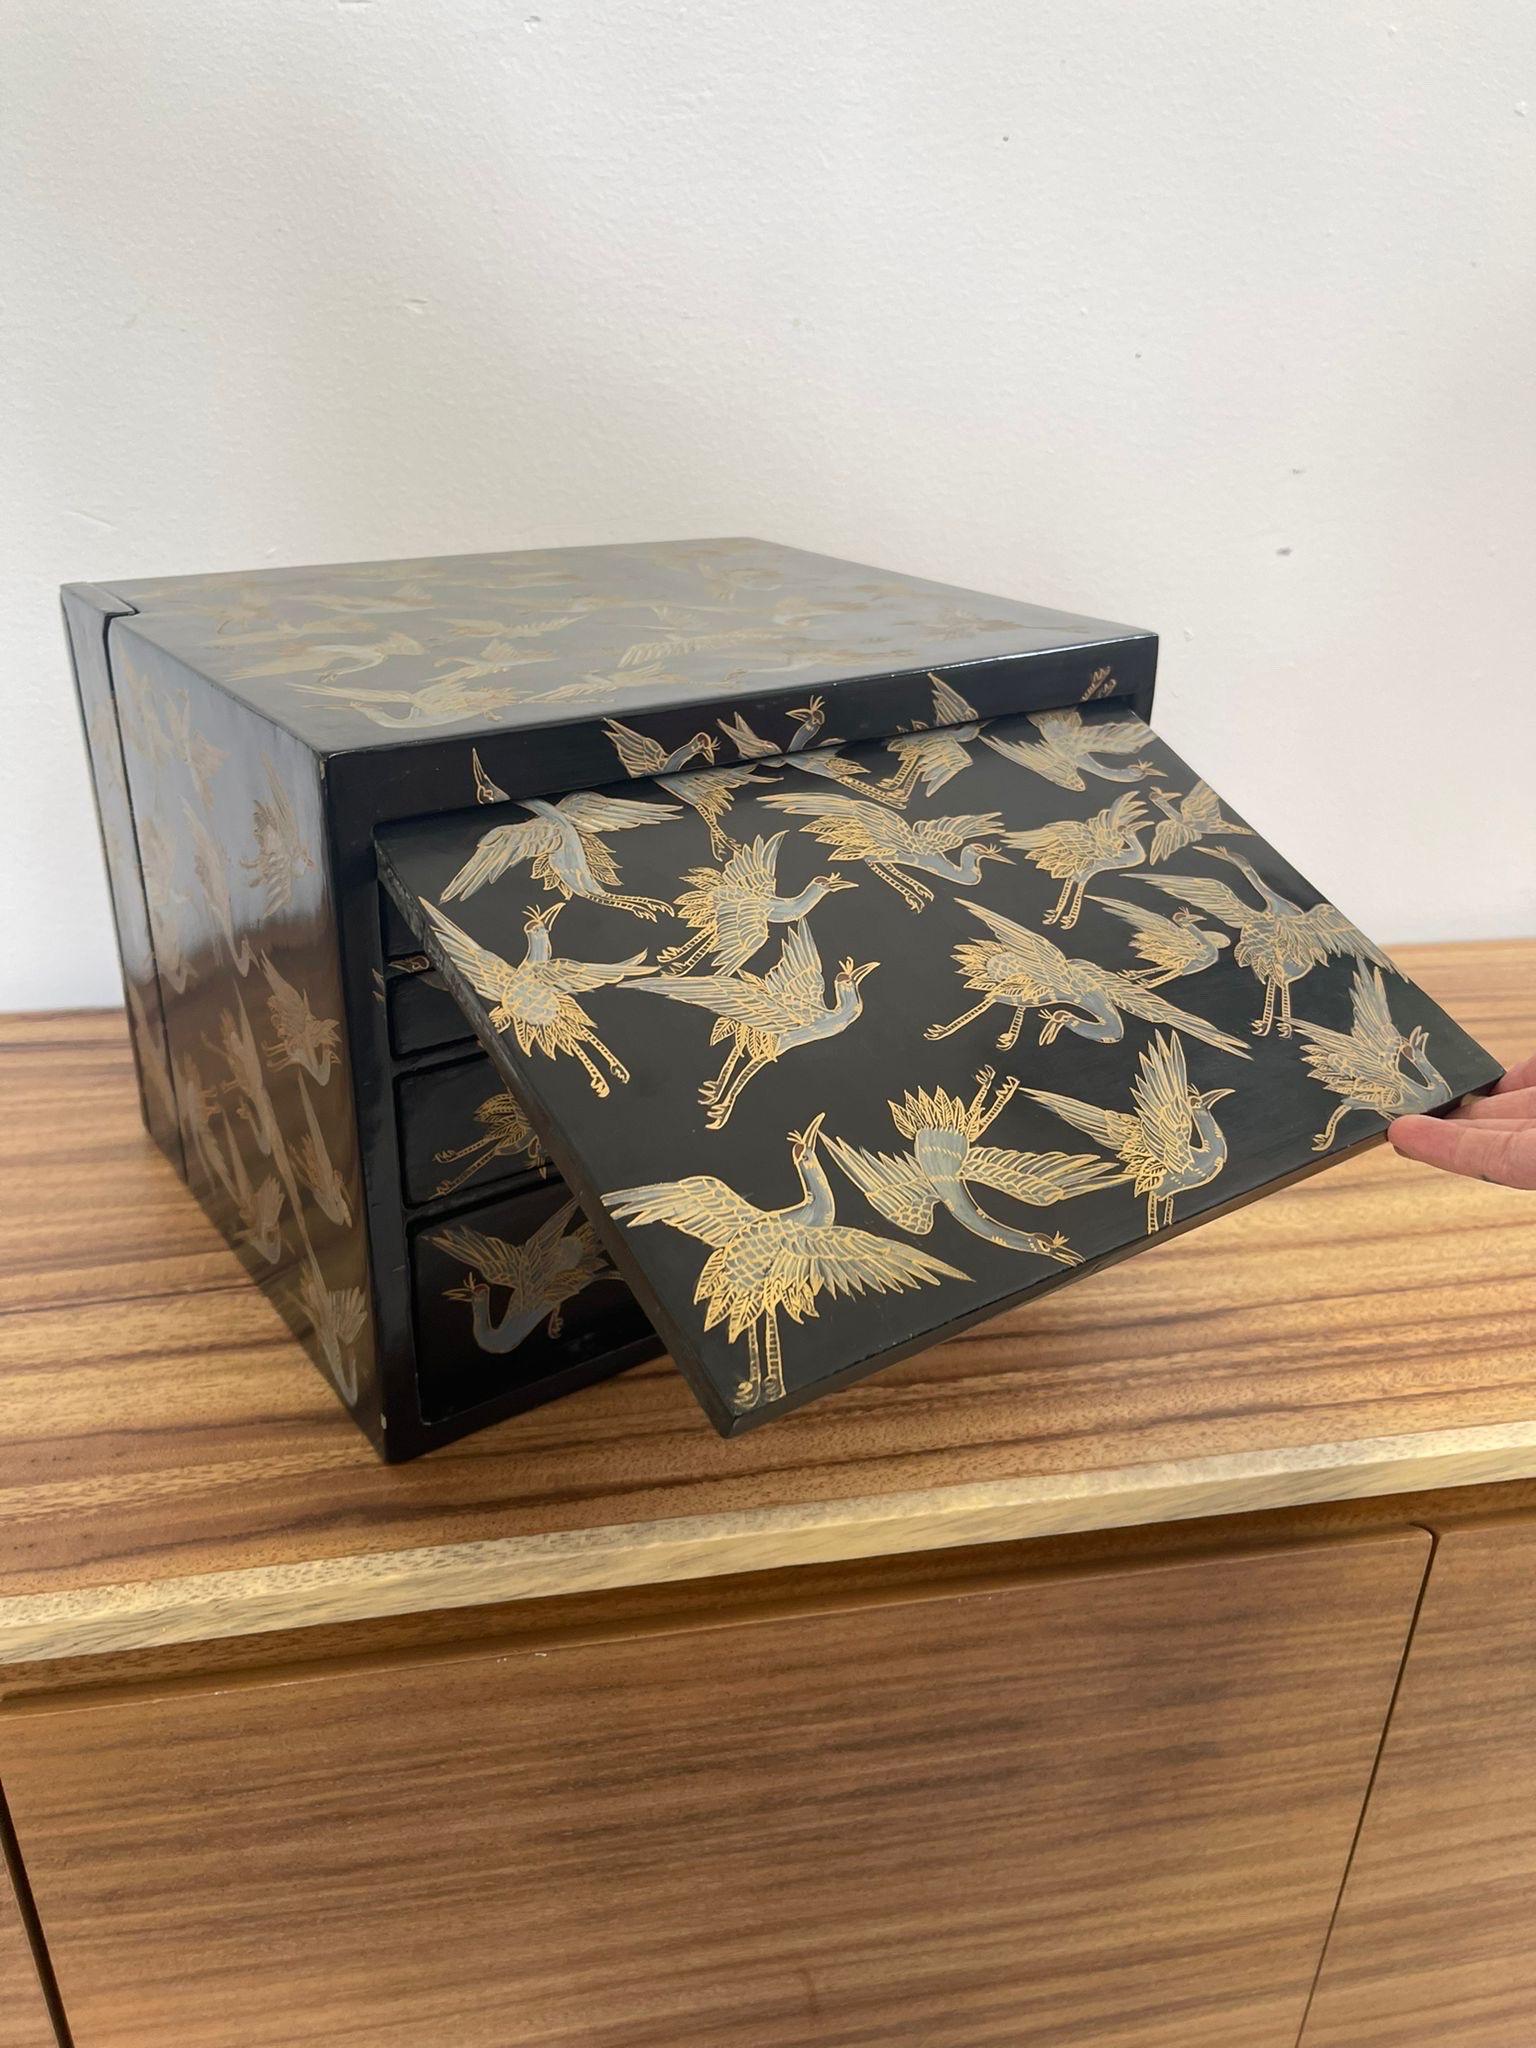 Wood Japanese Storage Box With Hidden Compartments and Crane Motif. For Sale